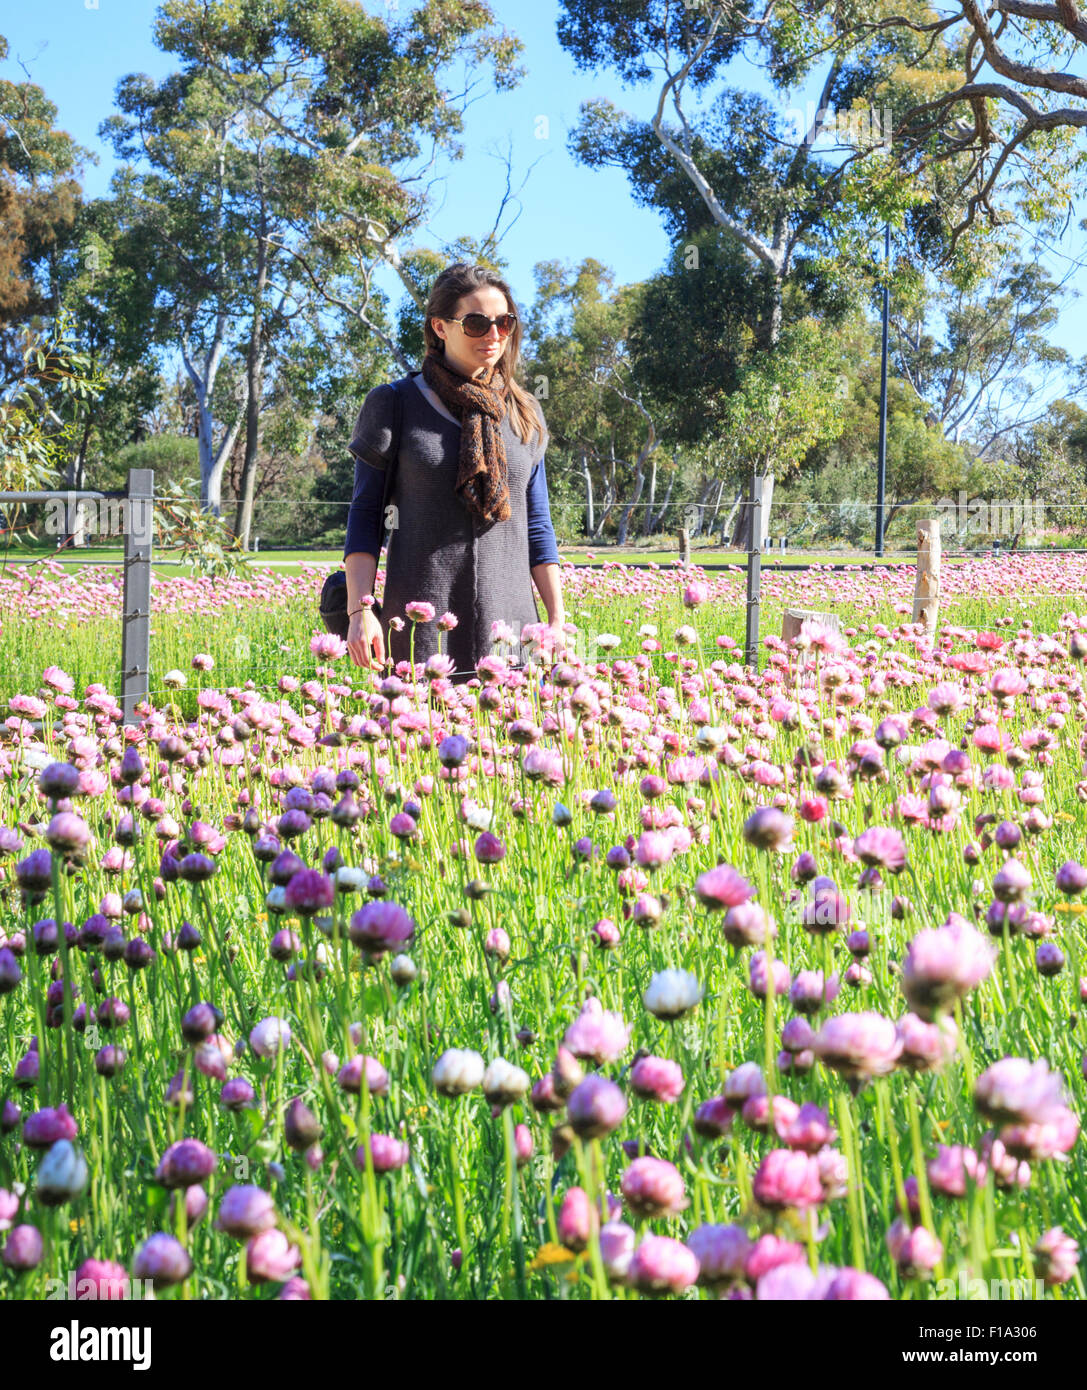 A woman admiring a display of everlasting flowers (Rhodanthe chlorocephala) in Kings Park during the Kings Park Festival. Perth, Western Australia Stock Photo